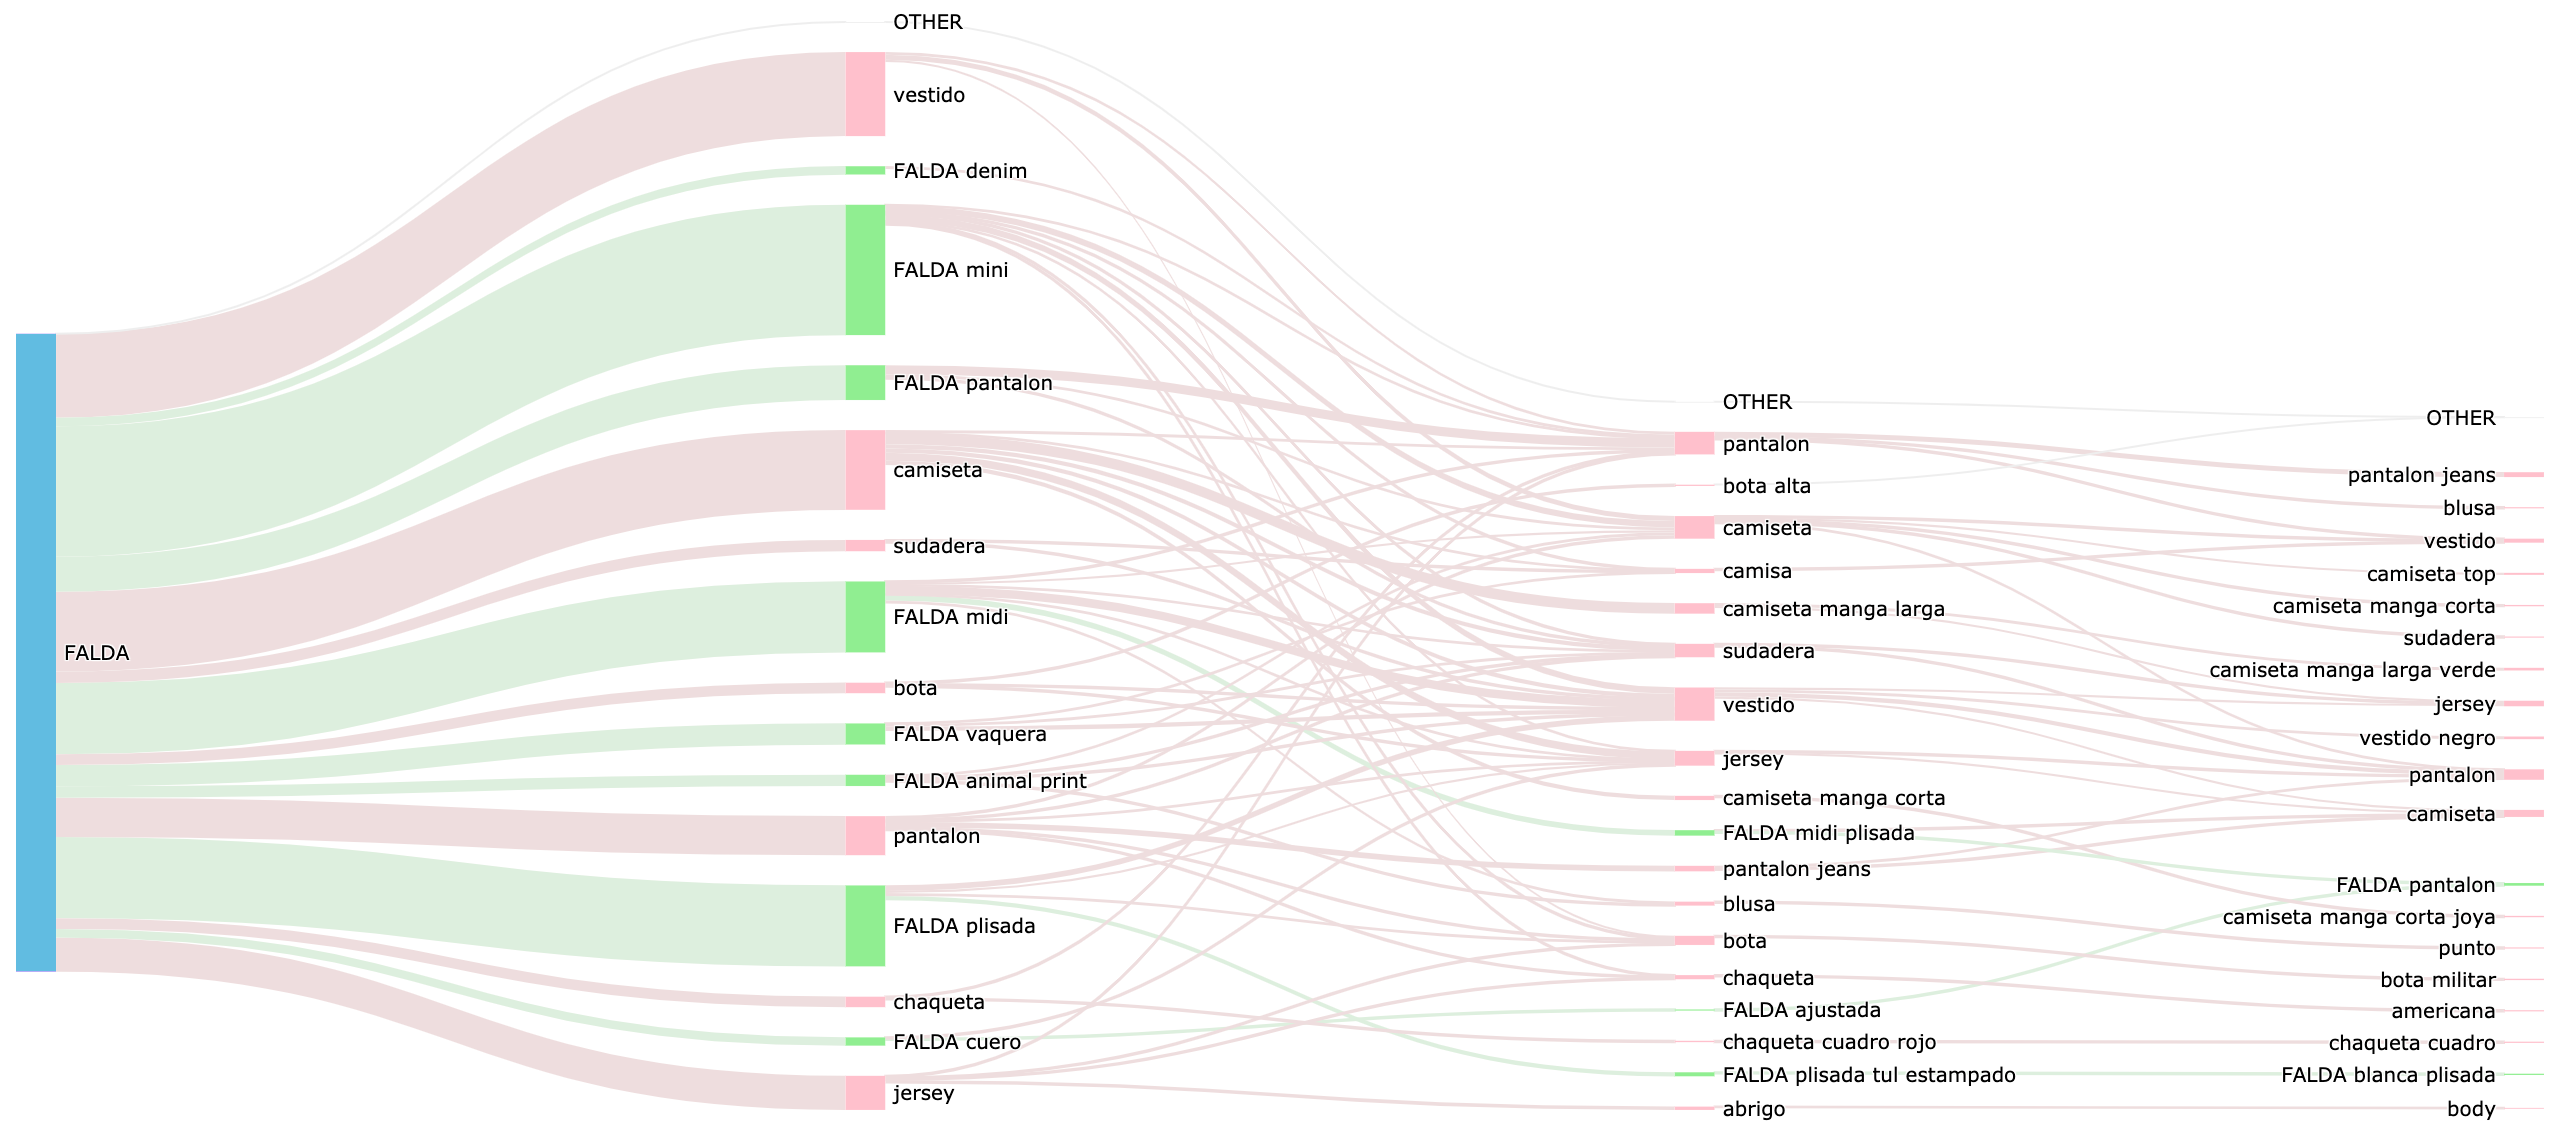 Sankey diagram for term 'skirt'. The terms next to the larger green rectangles are good fits for autocomplete terms and the terms next to the pink for related products suggestions.